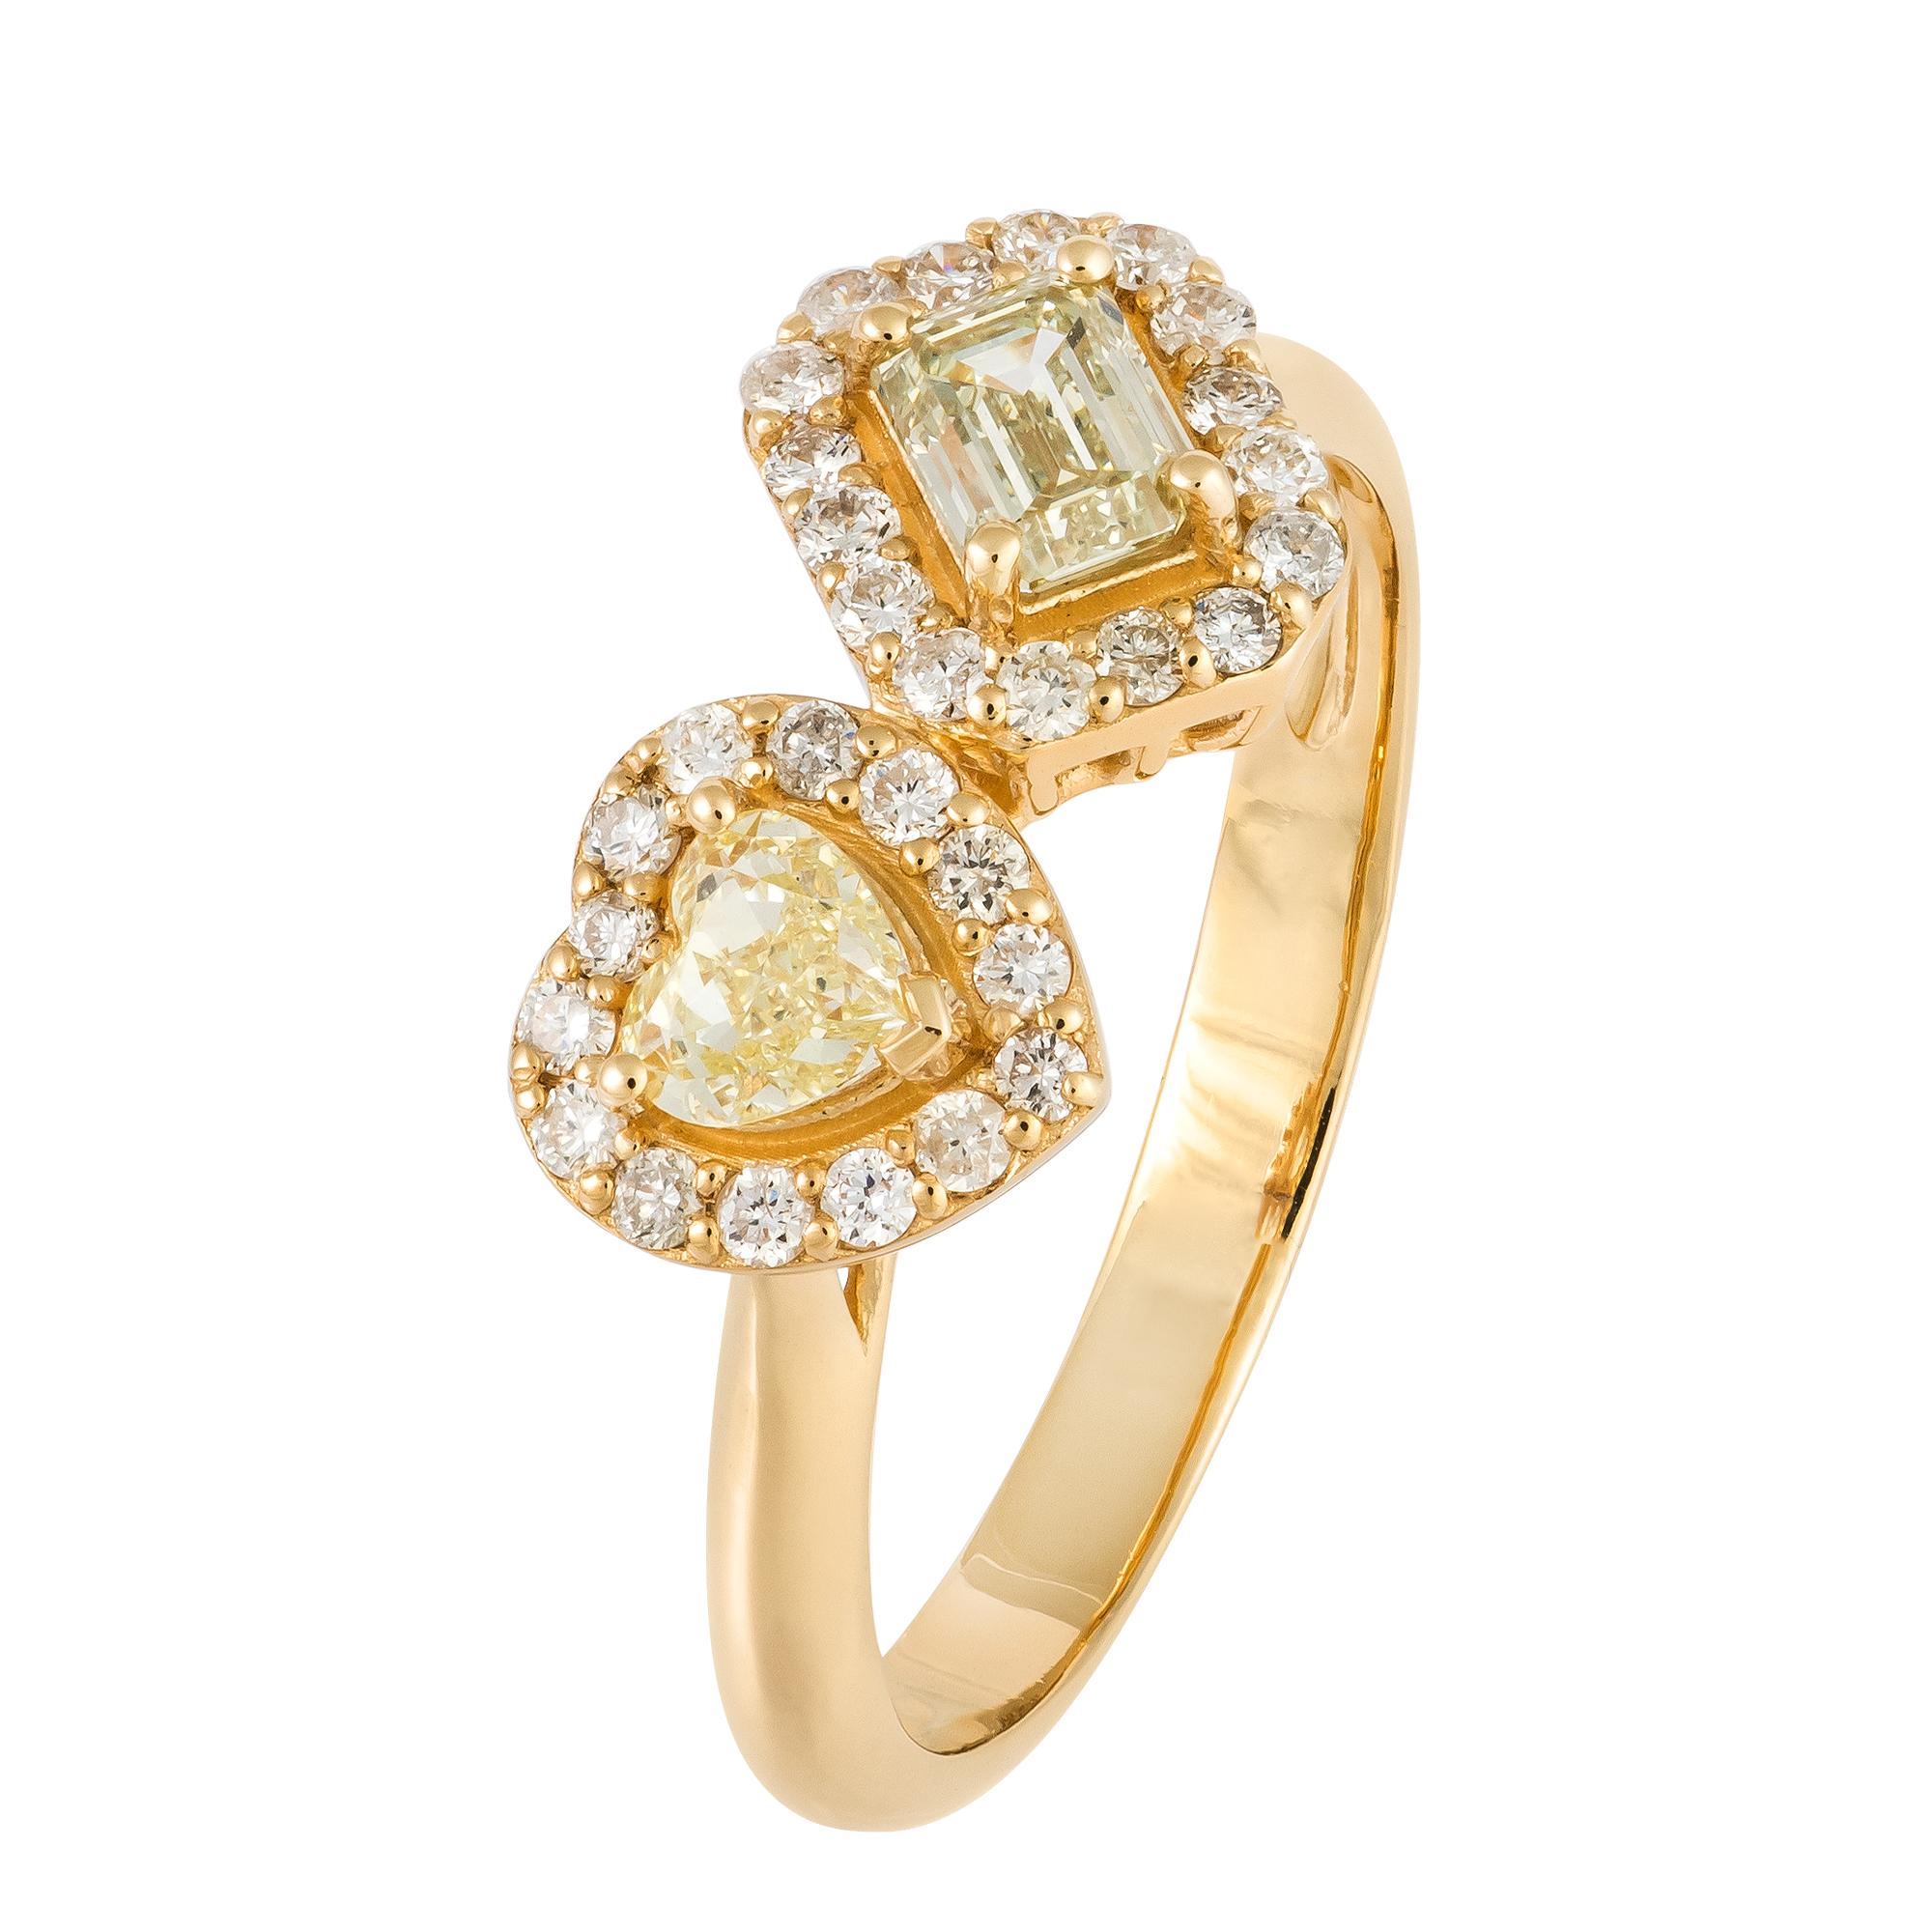 For Sale:  Impressive Yellow 18K Gold White Yellow Diamond Ring For Her 2